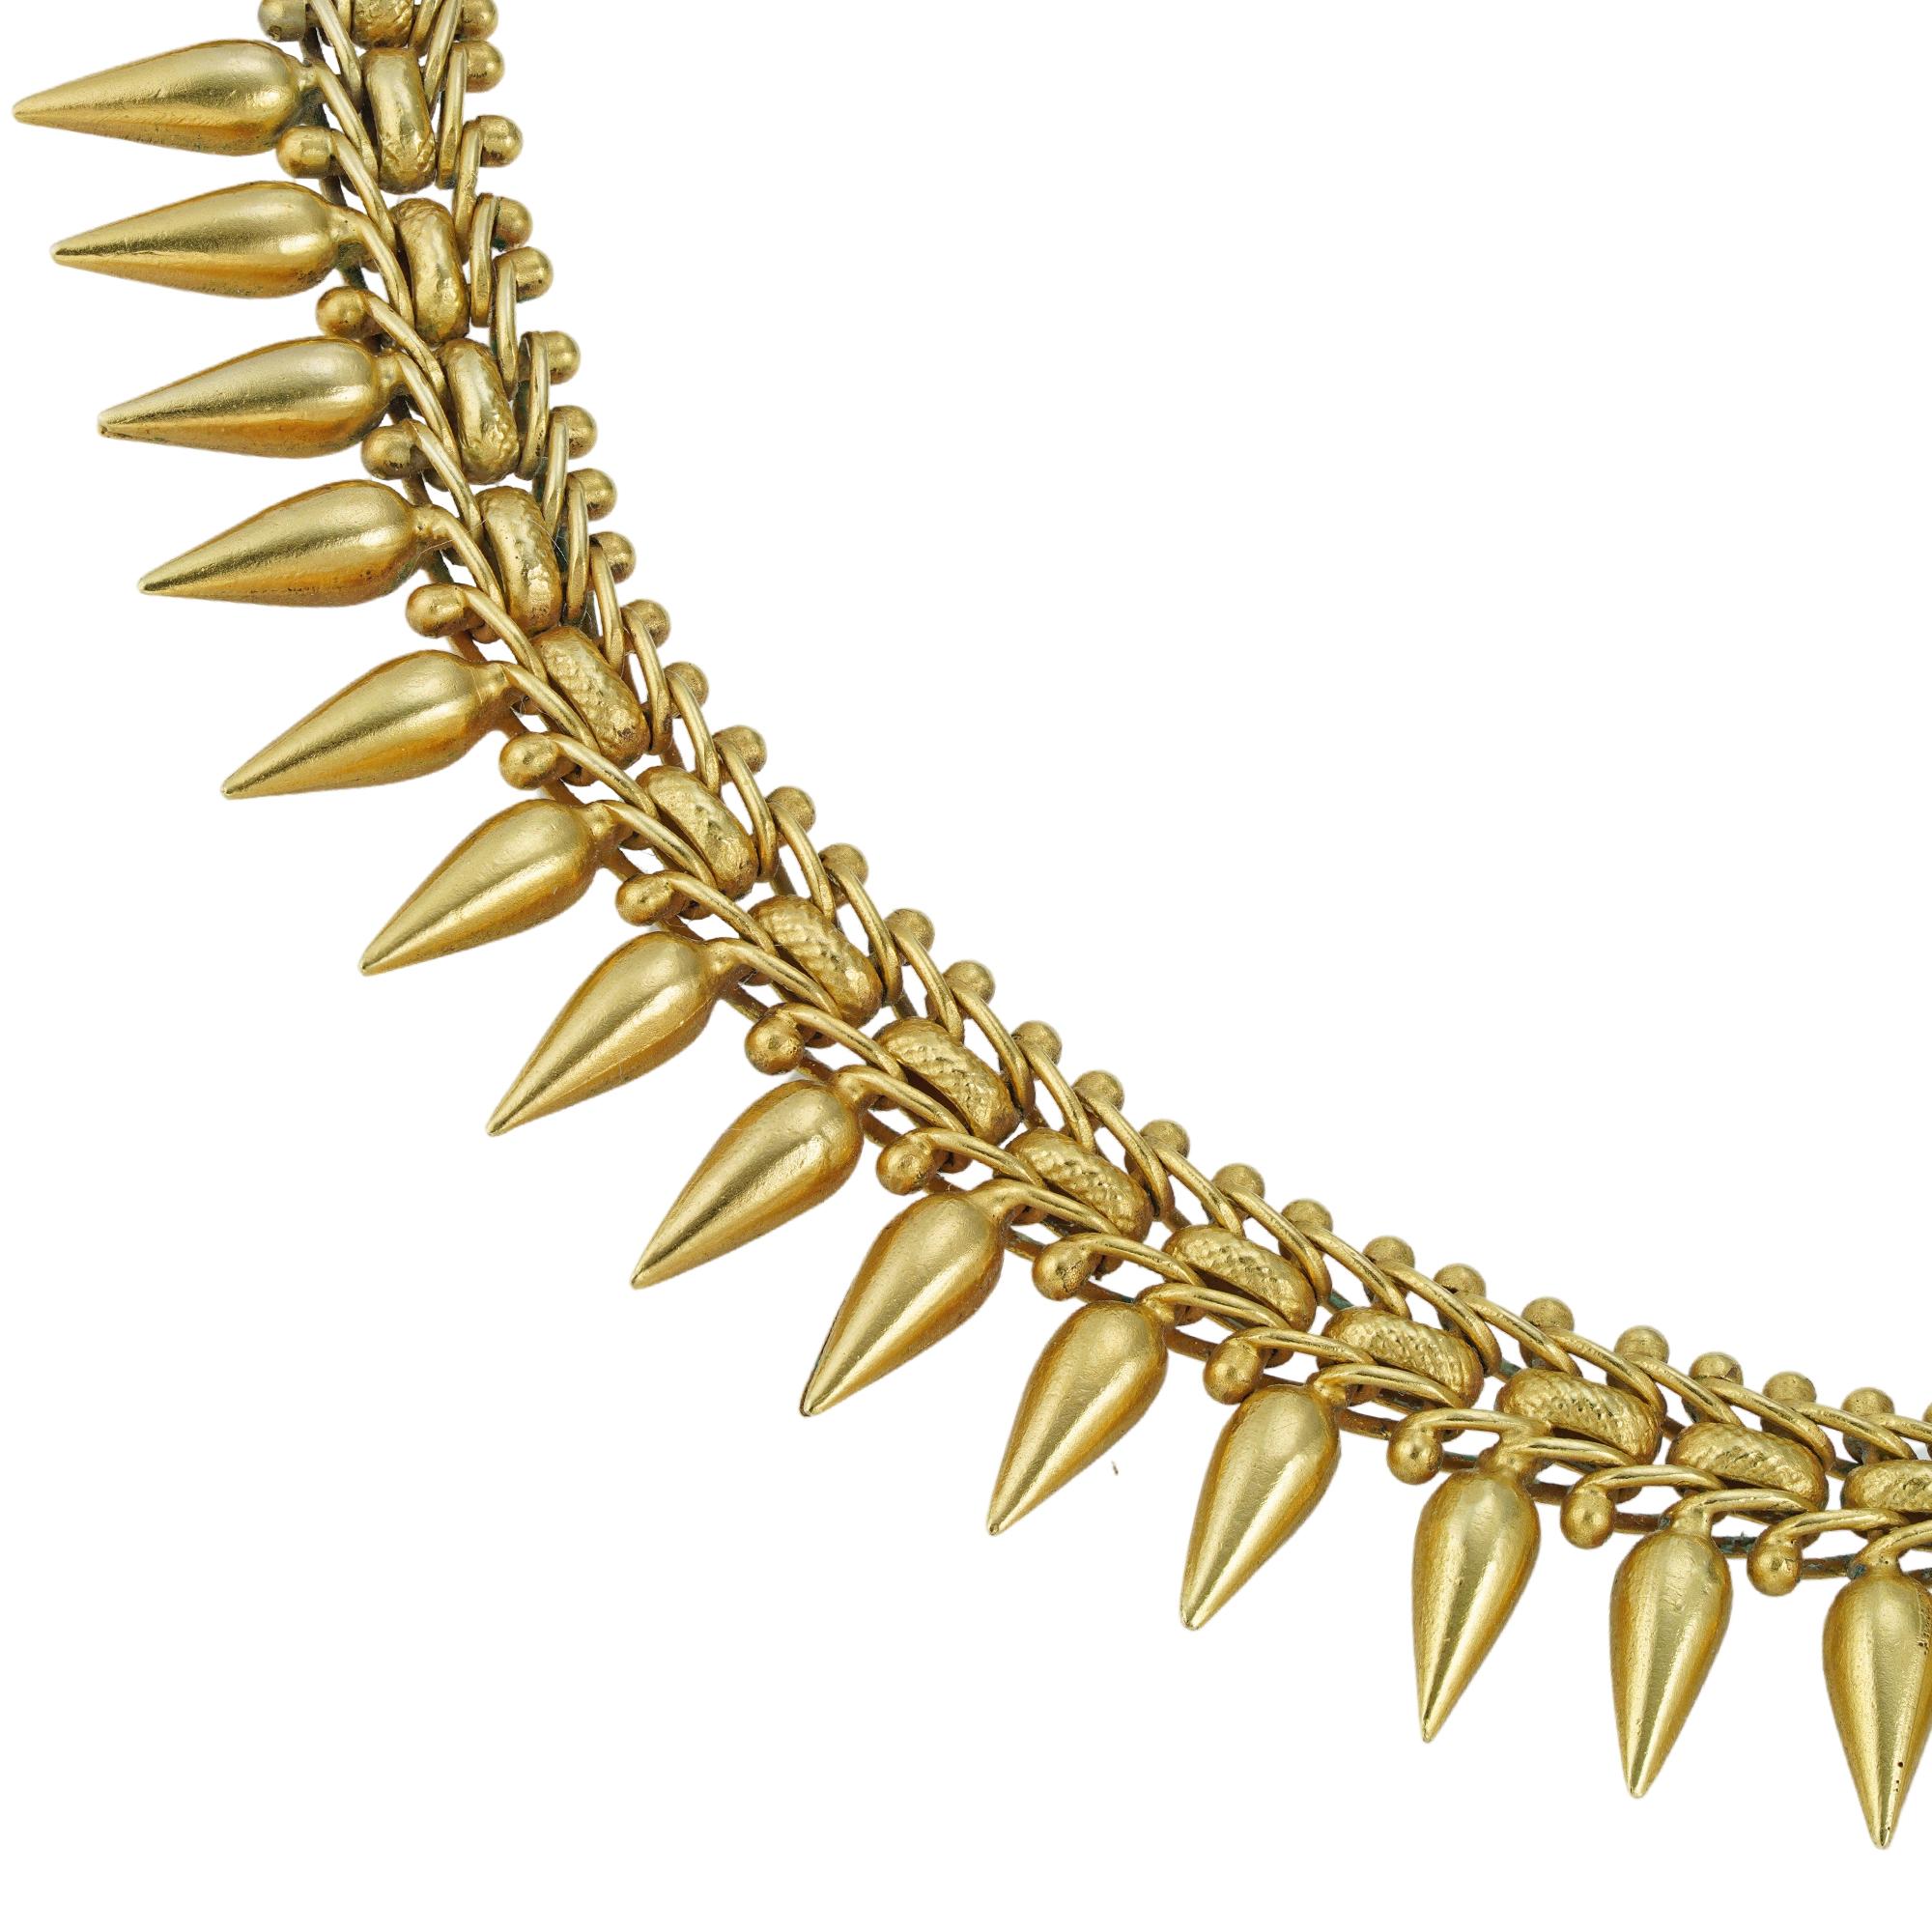 A Victorian archaeological revival gold necklace, consisting of a row of fancy links, suspending eighty-six cone-shaped drop motifs, all made in yellow gold, with pull-down ring clasp, circa 1870, measuring approximately 44 x 1.5cm, gross weight